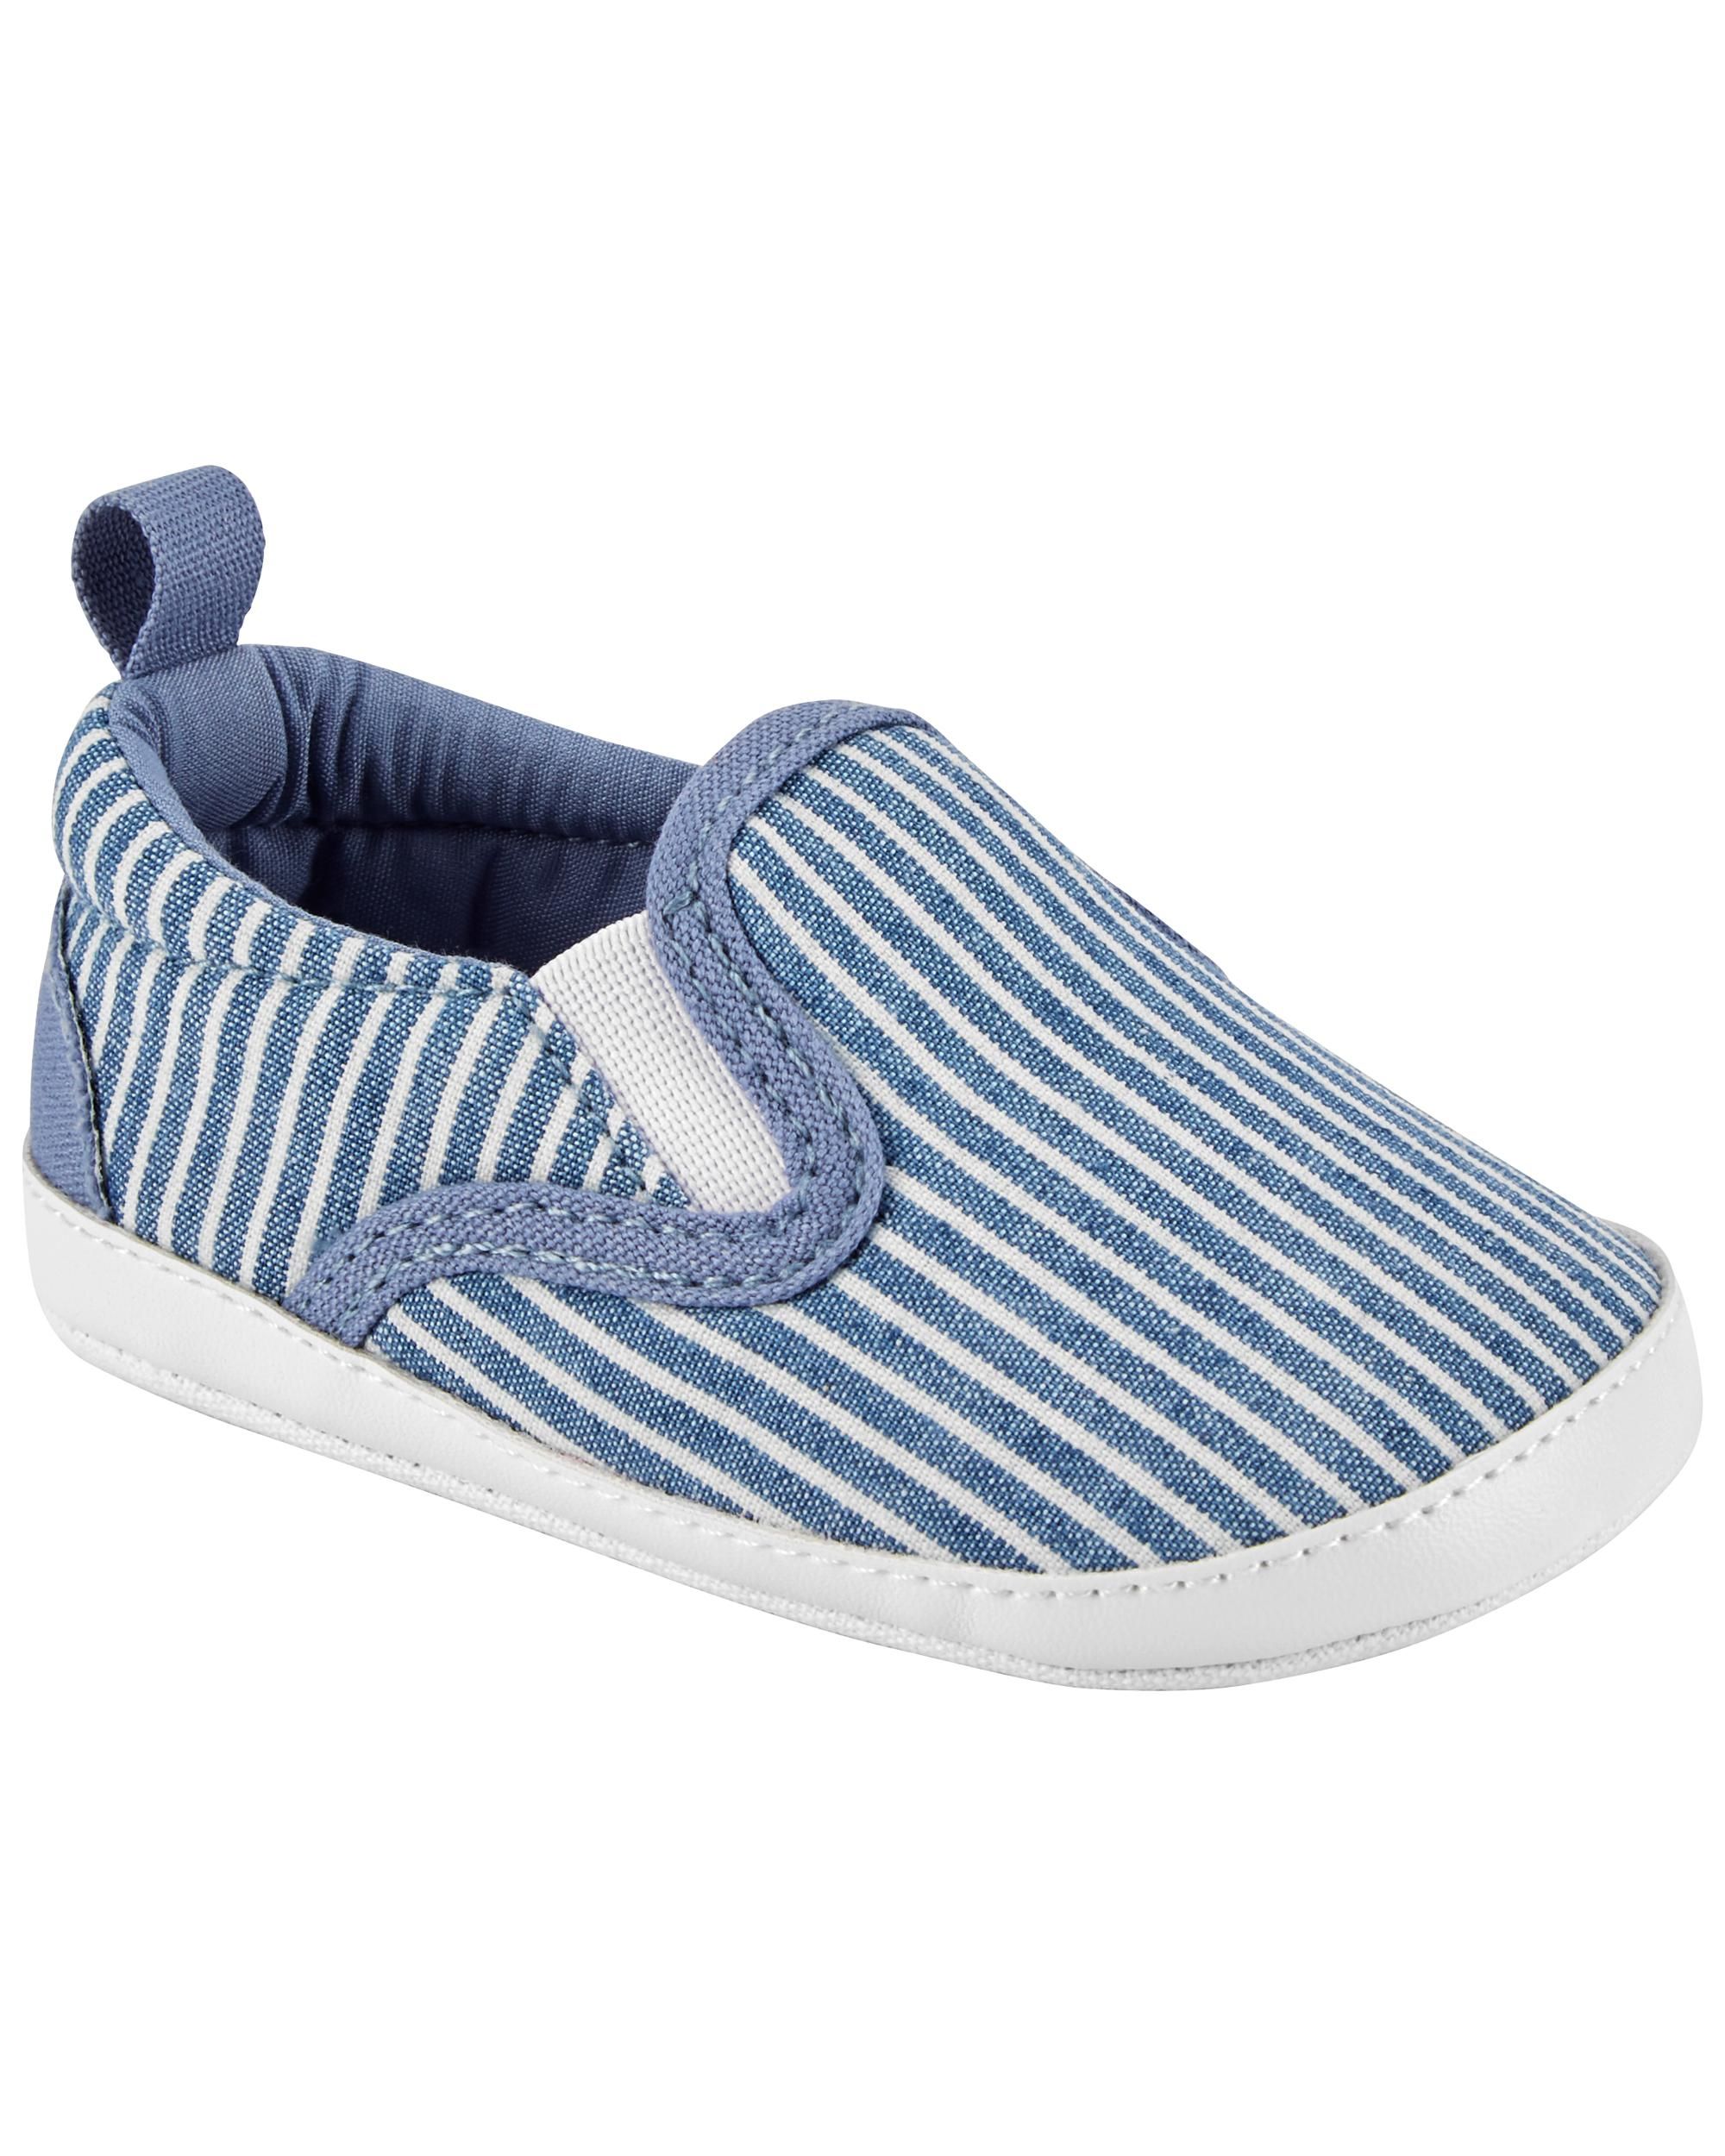 Chambray Slip-On Shoes | Carter's